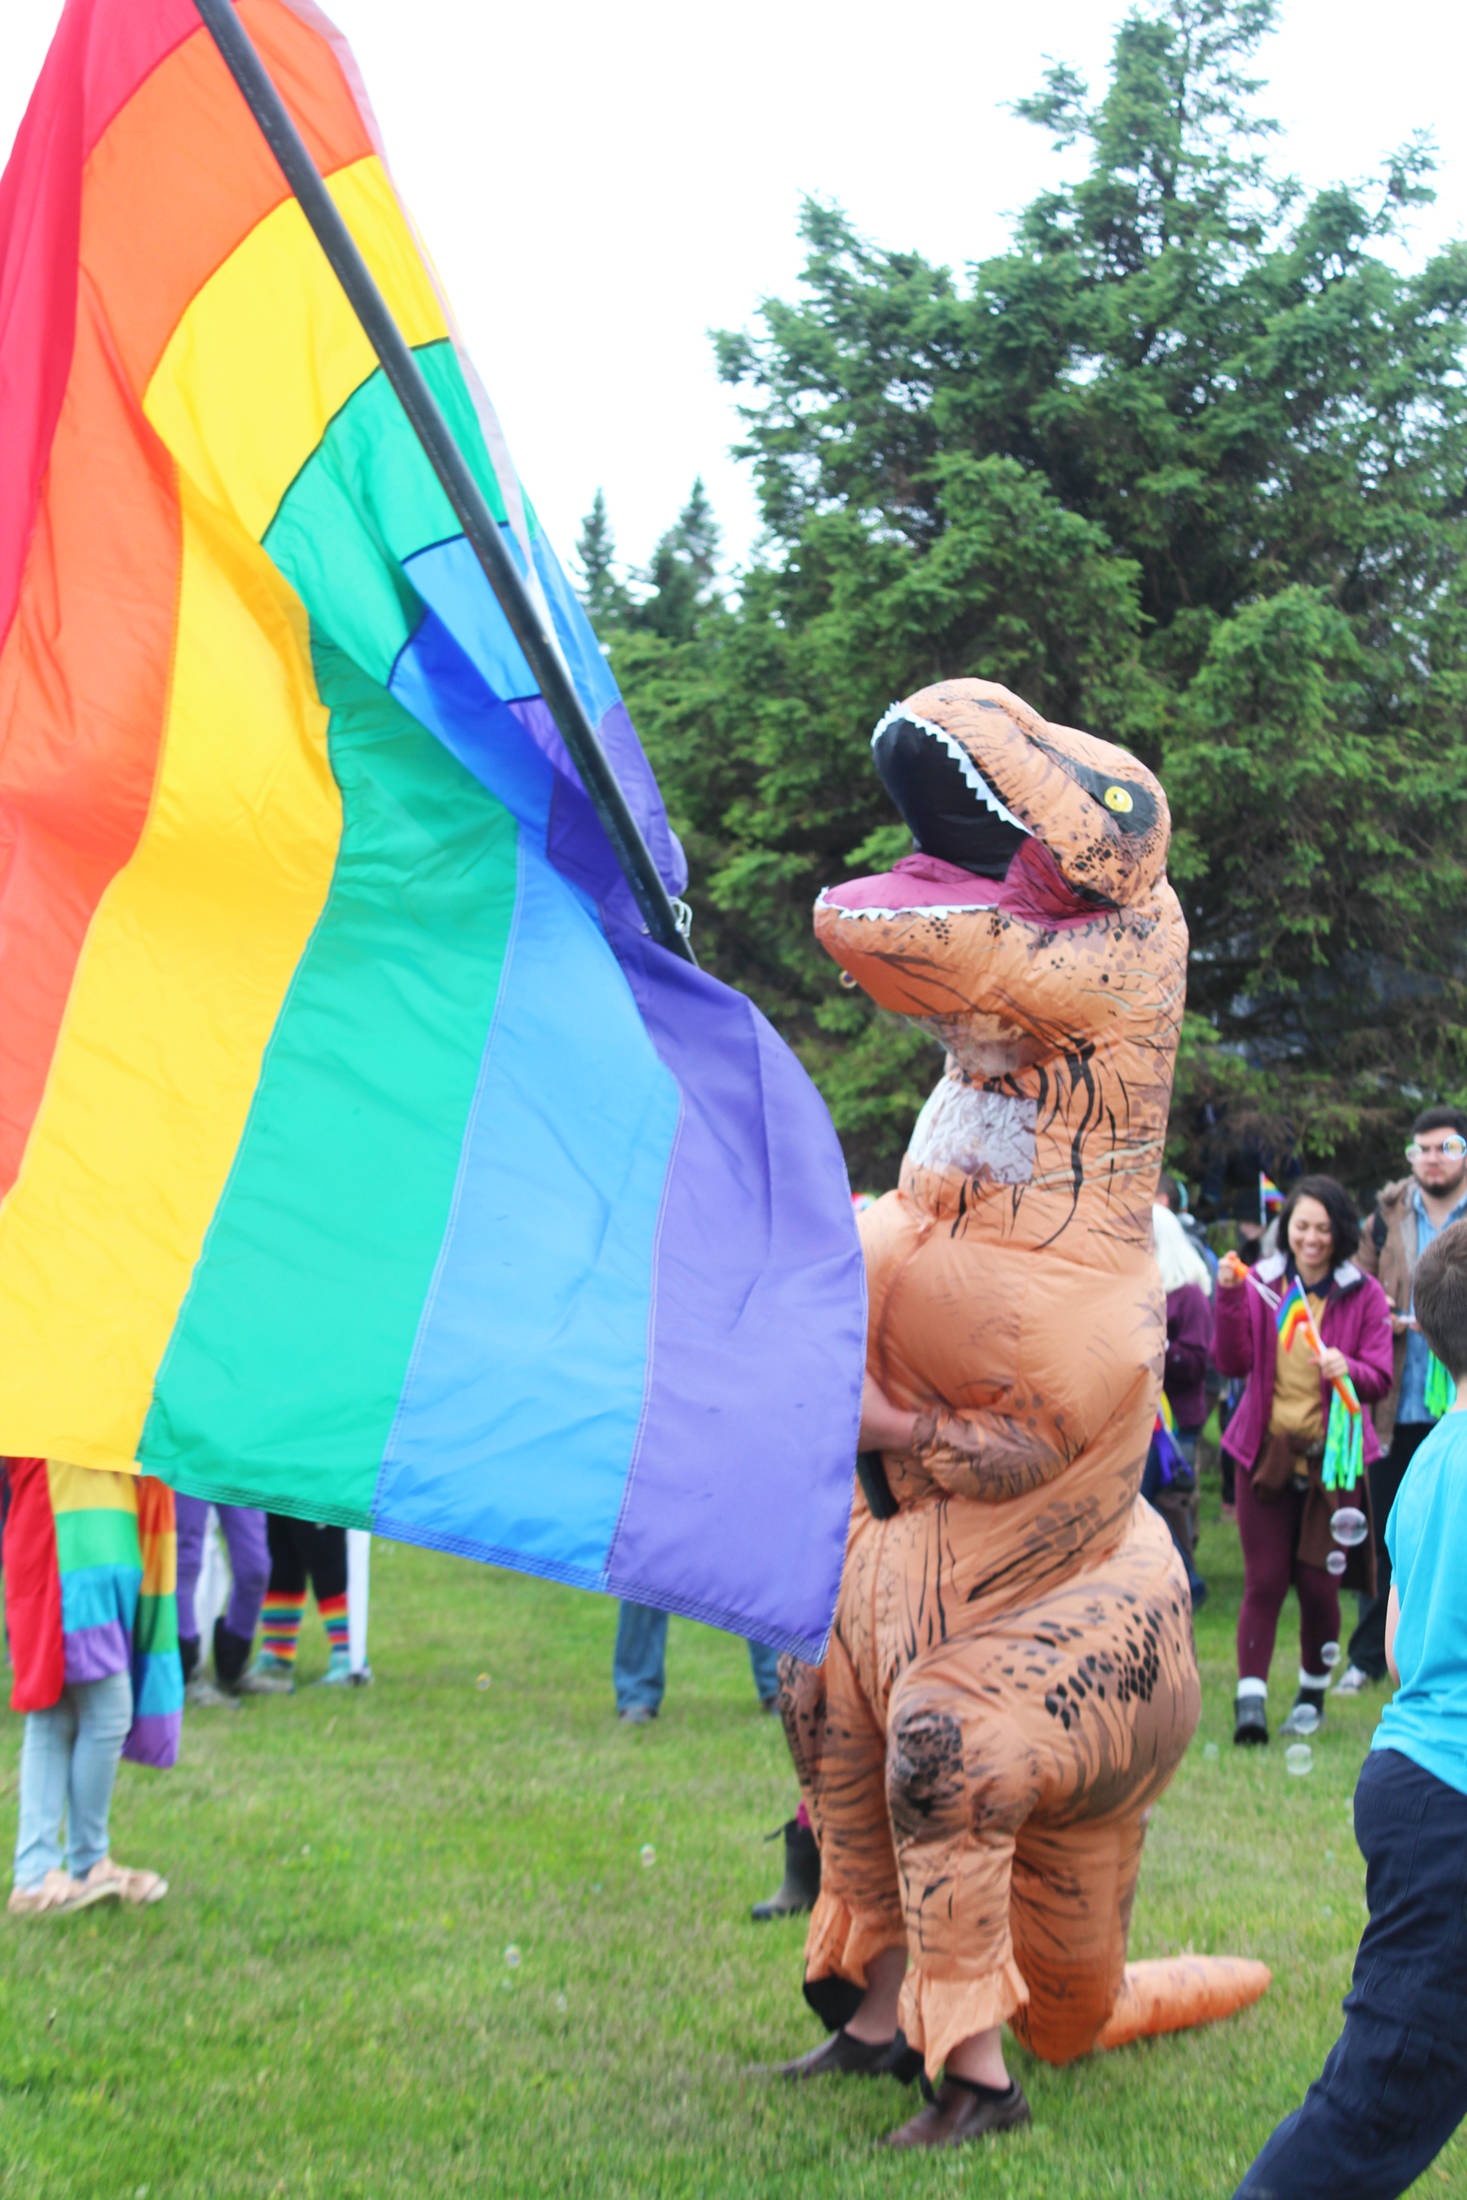 Gage Dillon, 14, waves a pride flag while dressed in a dinosaur suit before Homer’s first ever Pride March on Saturday, June 23, 2018 at WKFL Park in Homer, Alaska. About 280 people filled the streets during the march from the park to Grace Ridge Brewery. (Homer News file photo)